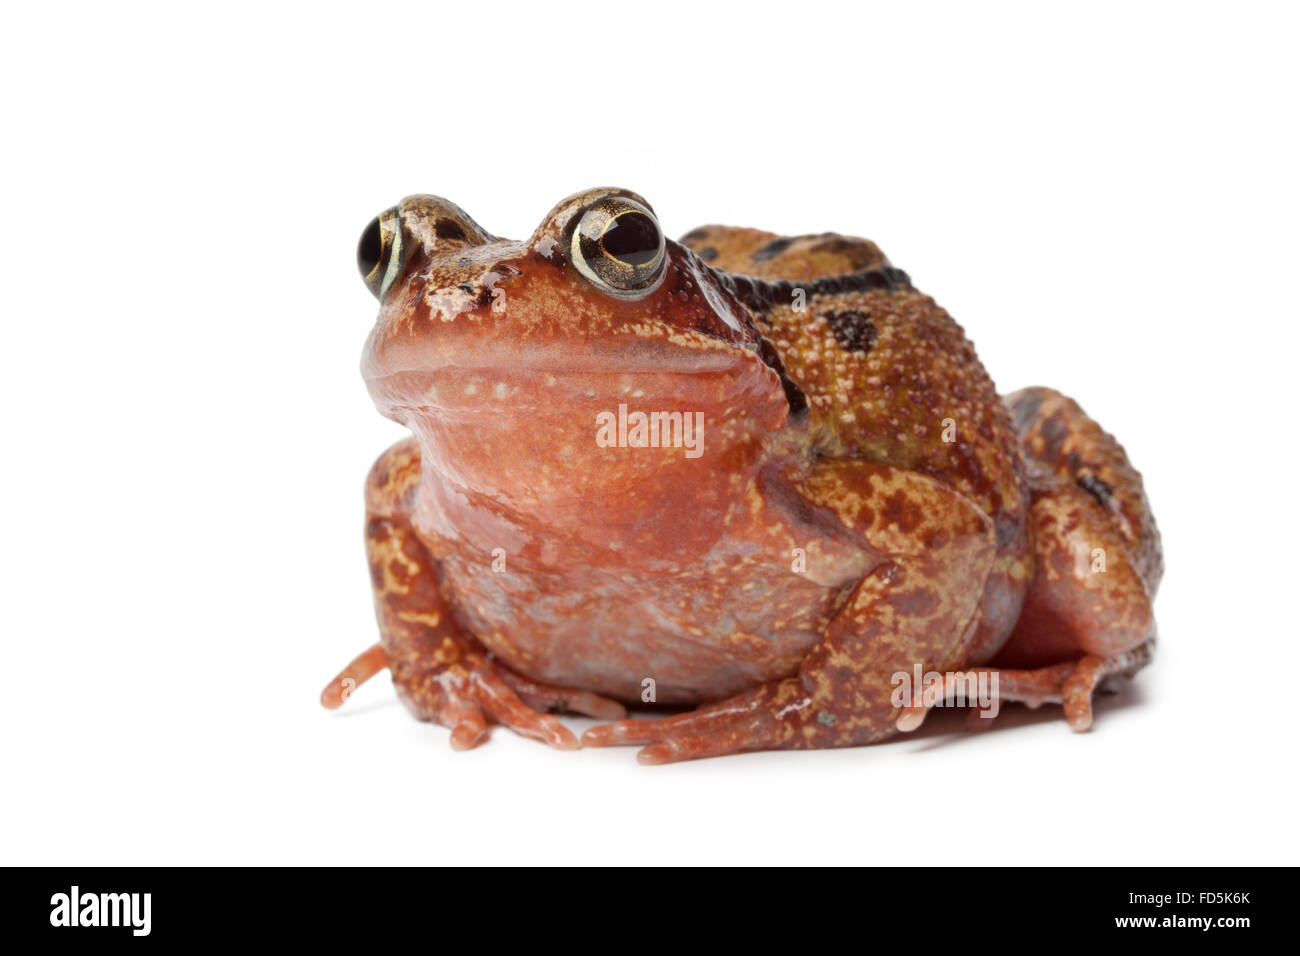 Single brown frog on white background Stock Photo